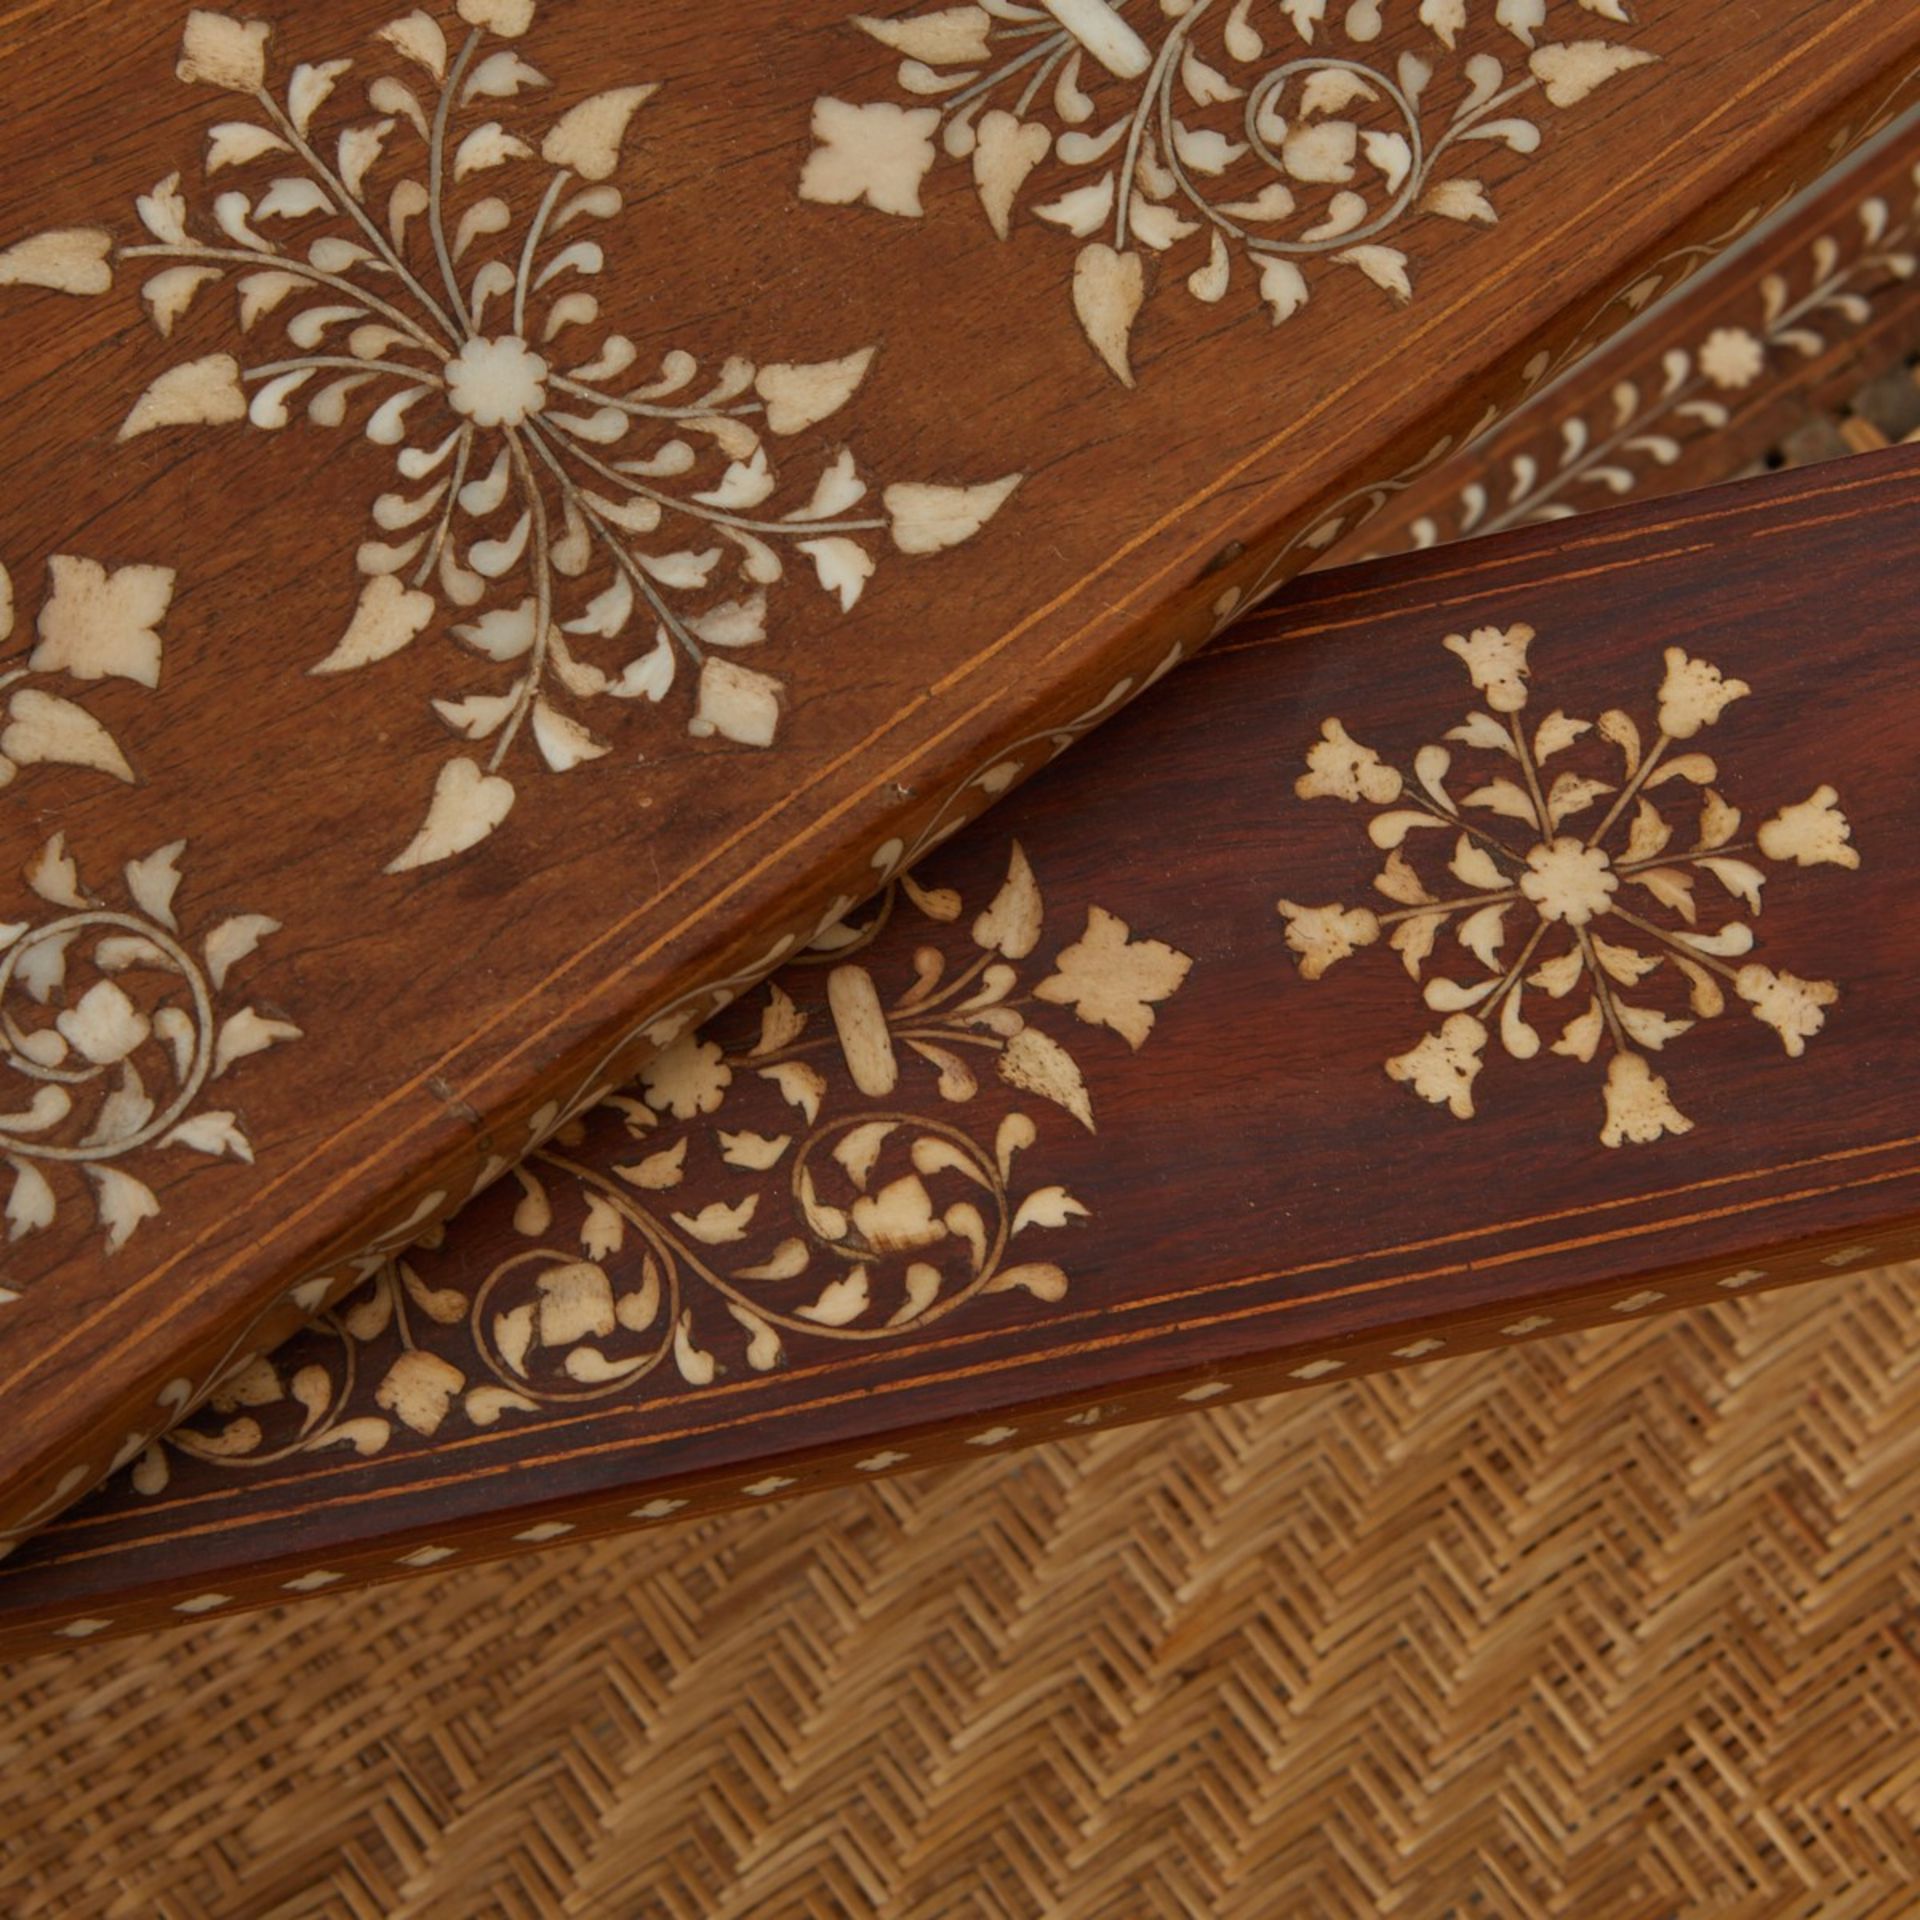 Syrian Inlaid Mother of Pearl Plantation Chair - Image 5 of 16